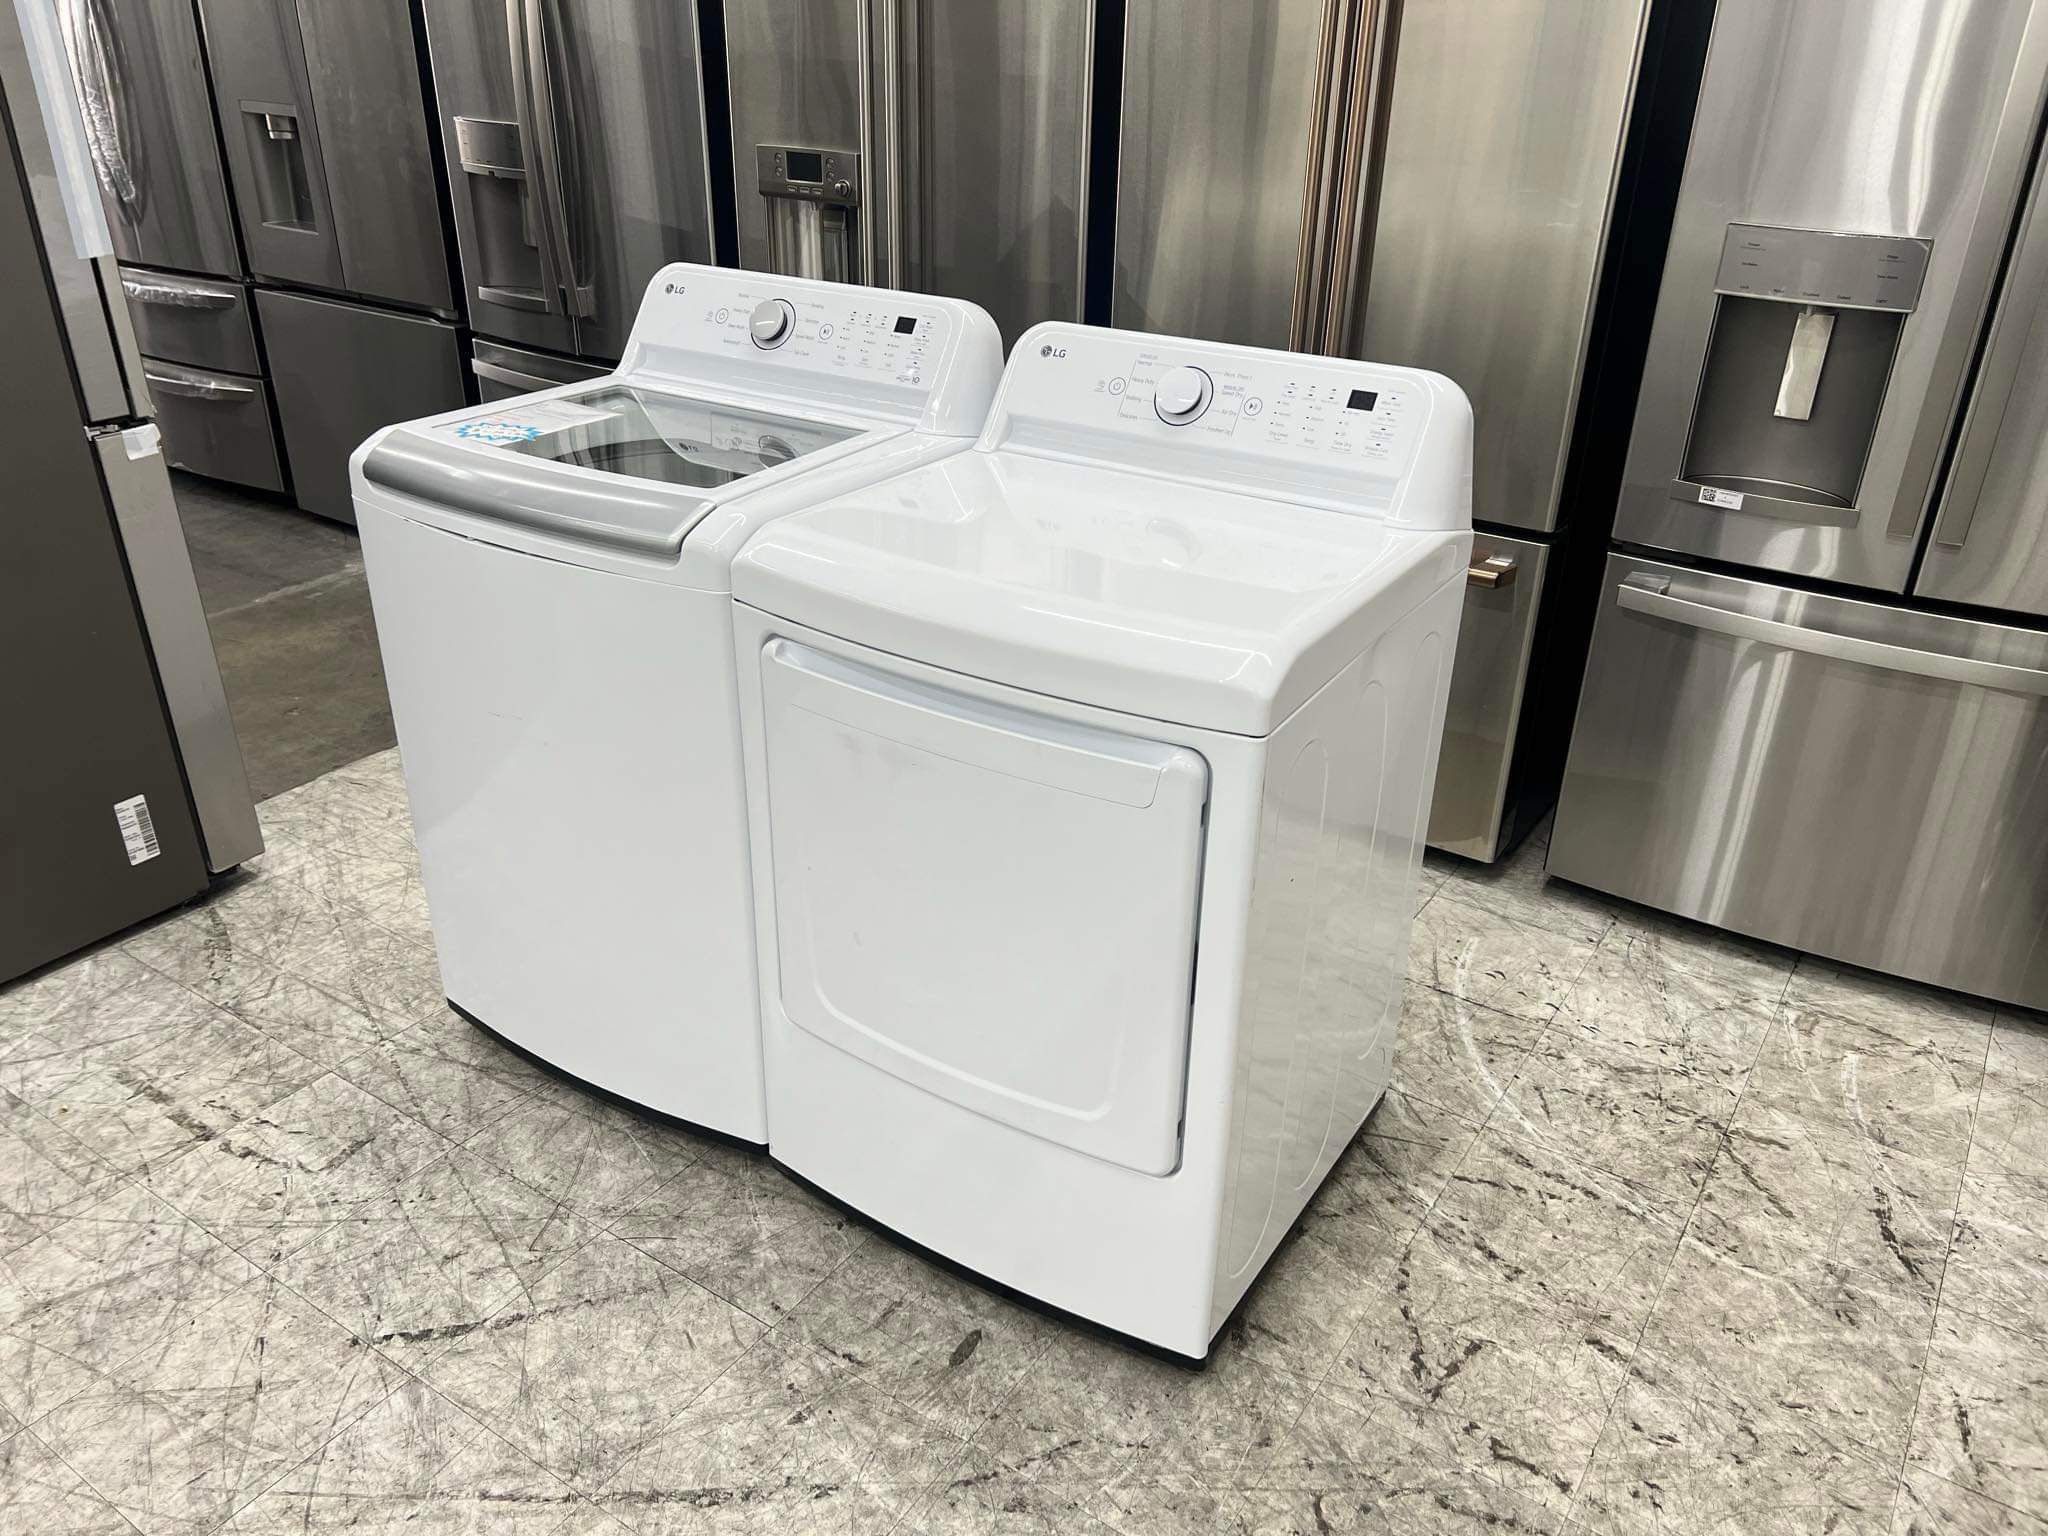 LG high efficiency top load washer and gas dryer in white 